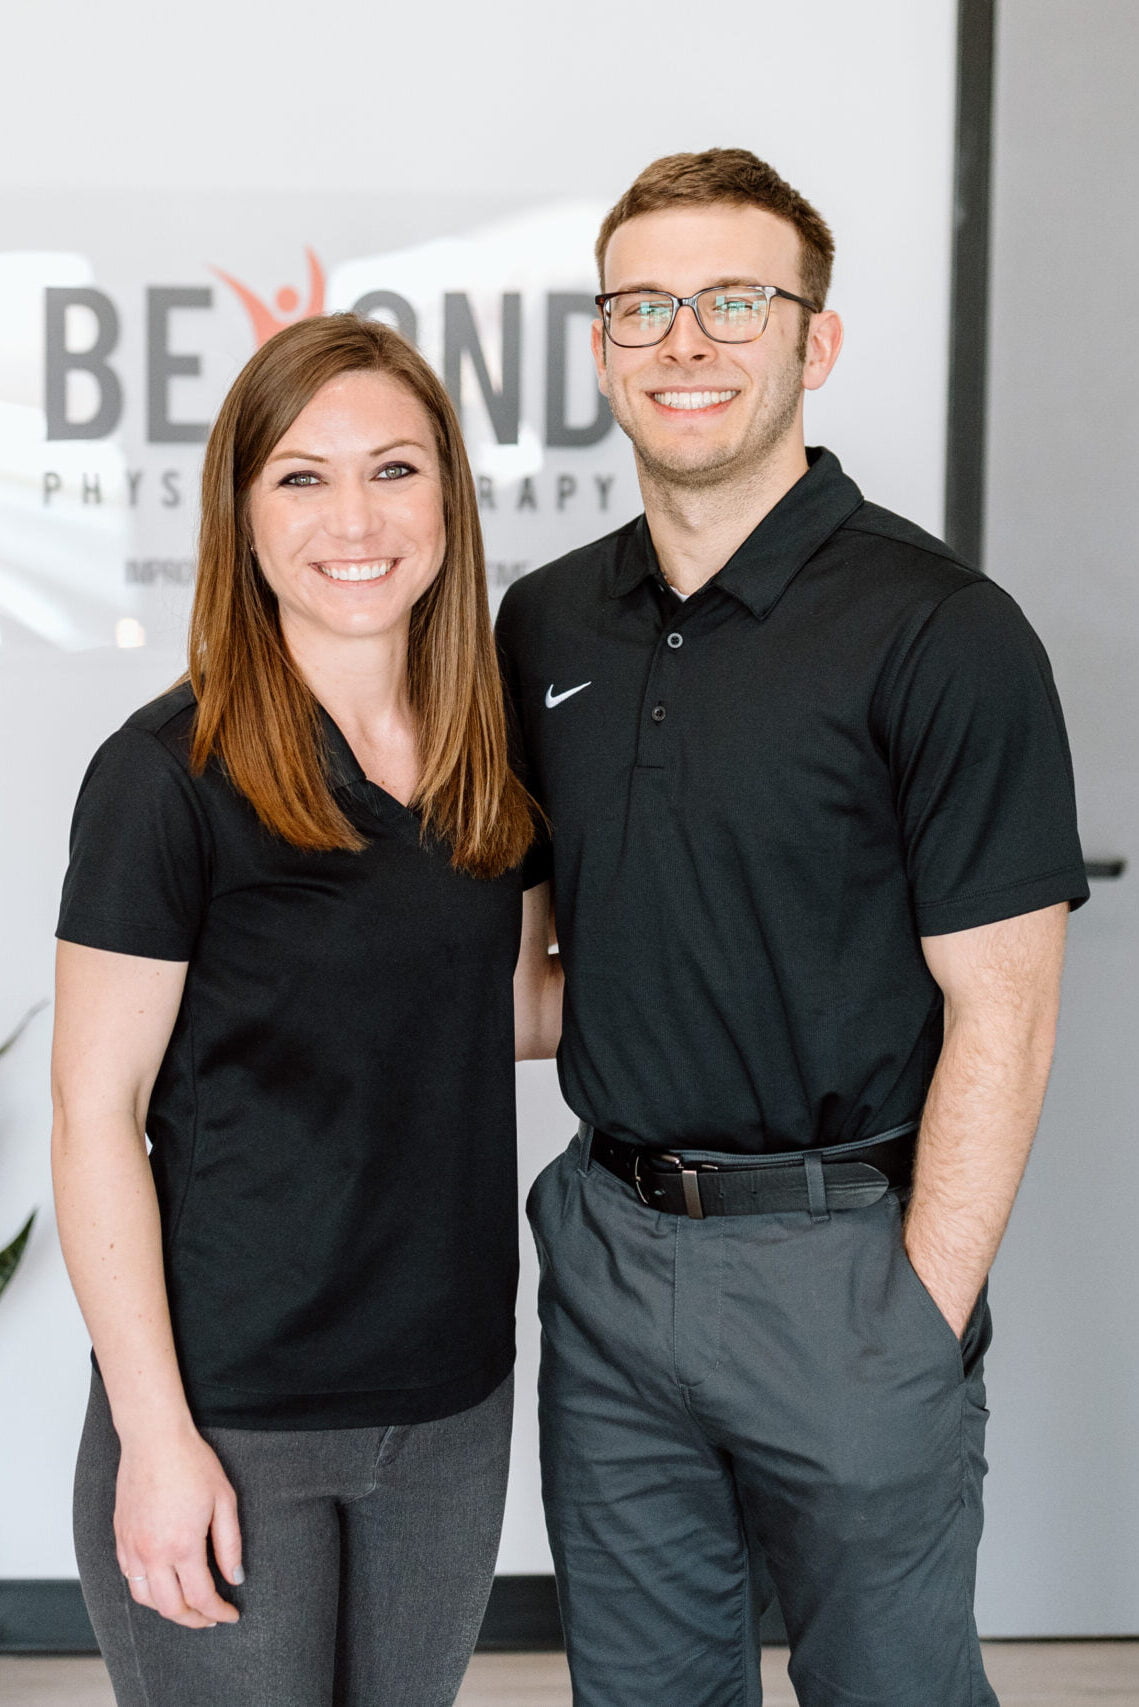 Tulsa Clinic Locations | Beyond Physical Therapy Tulsa